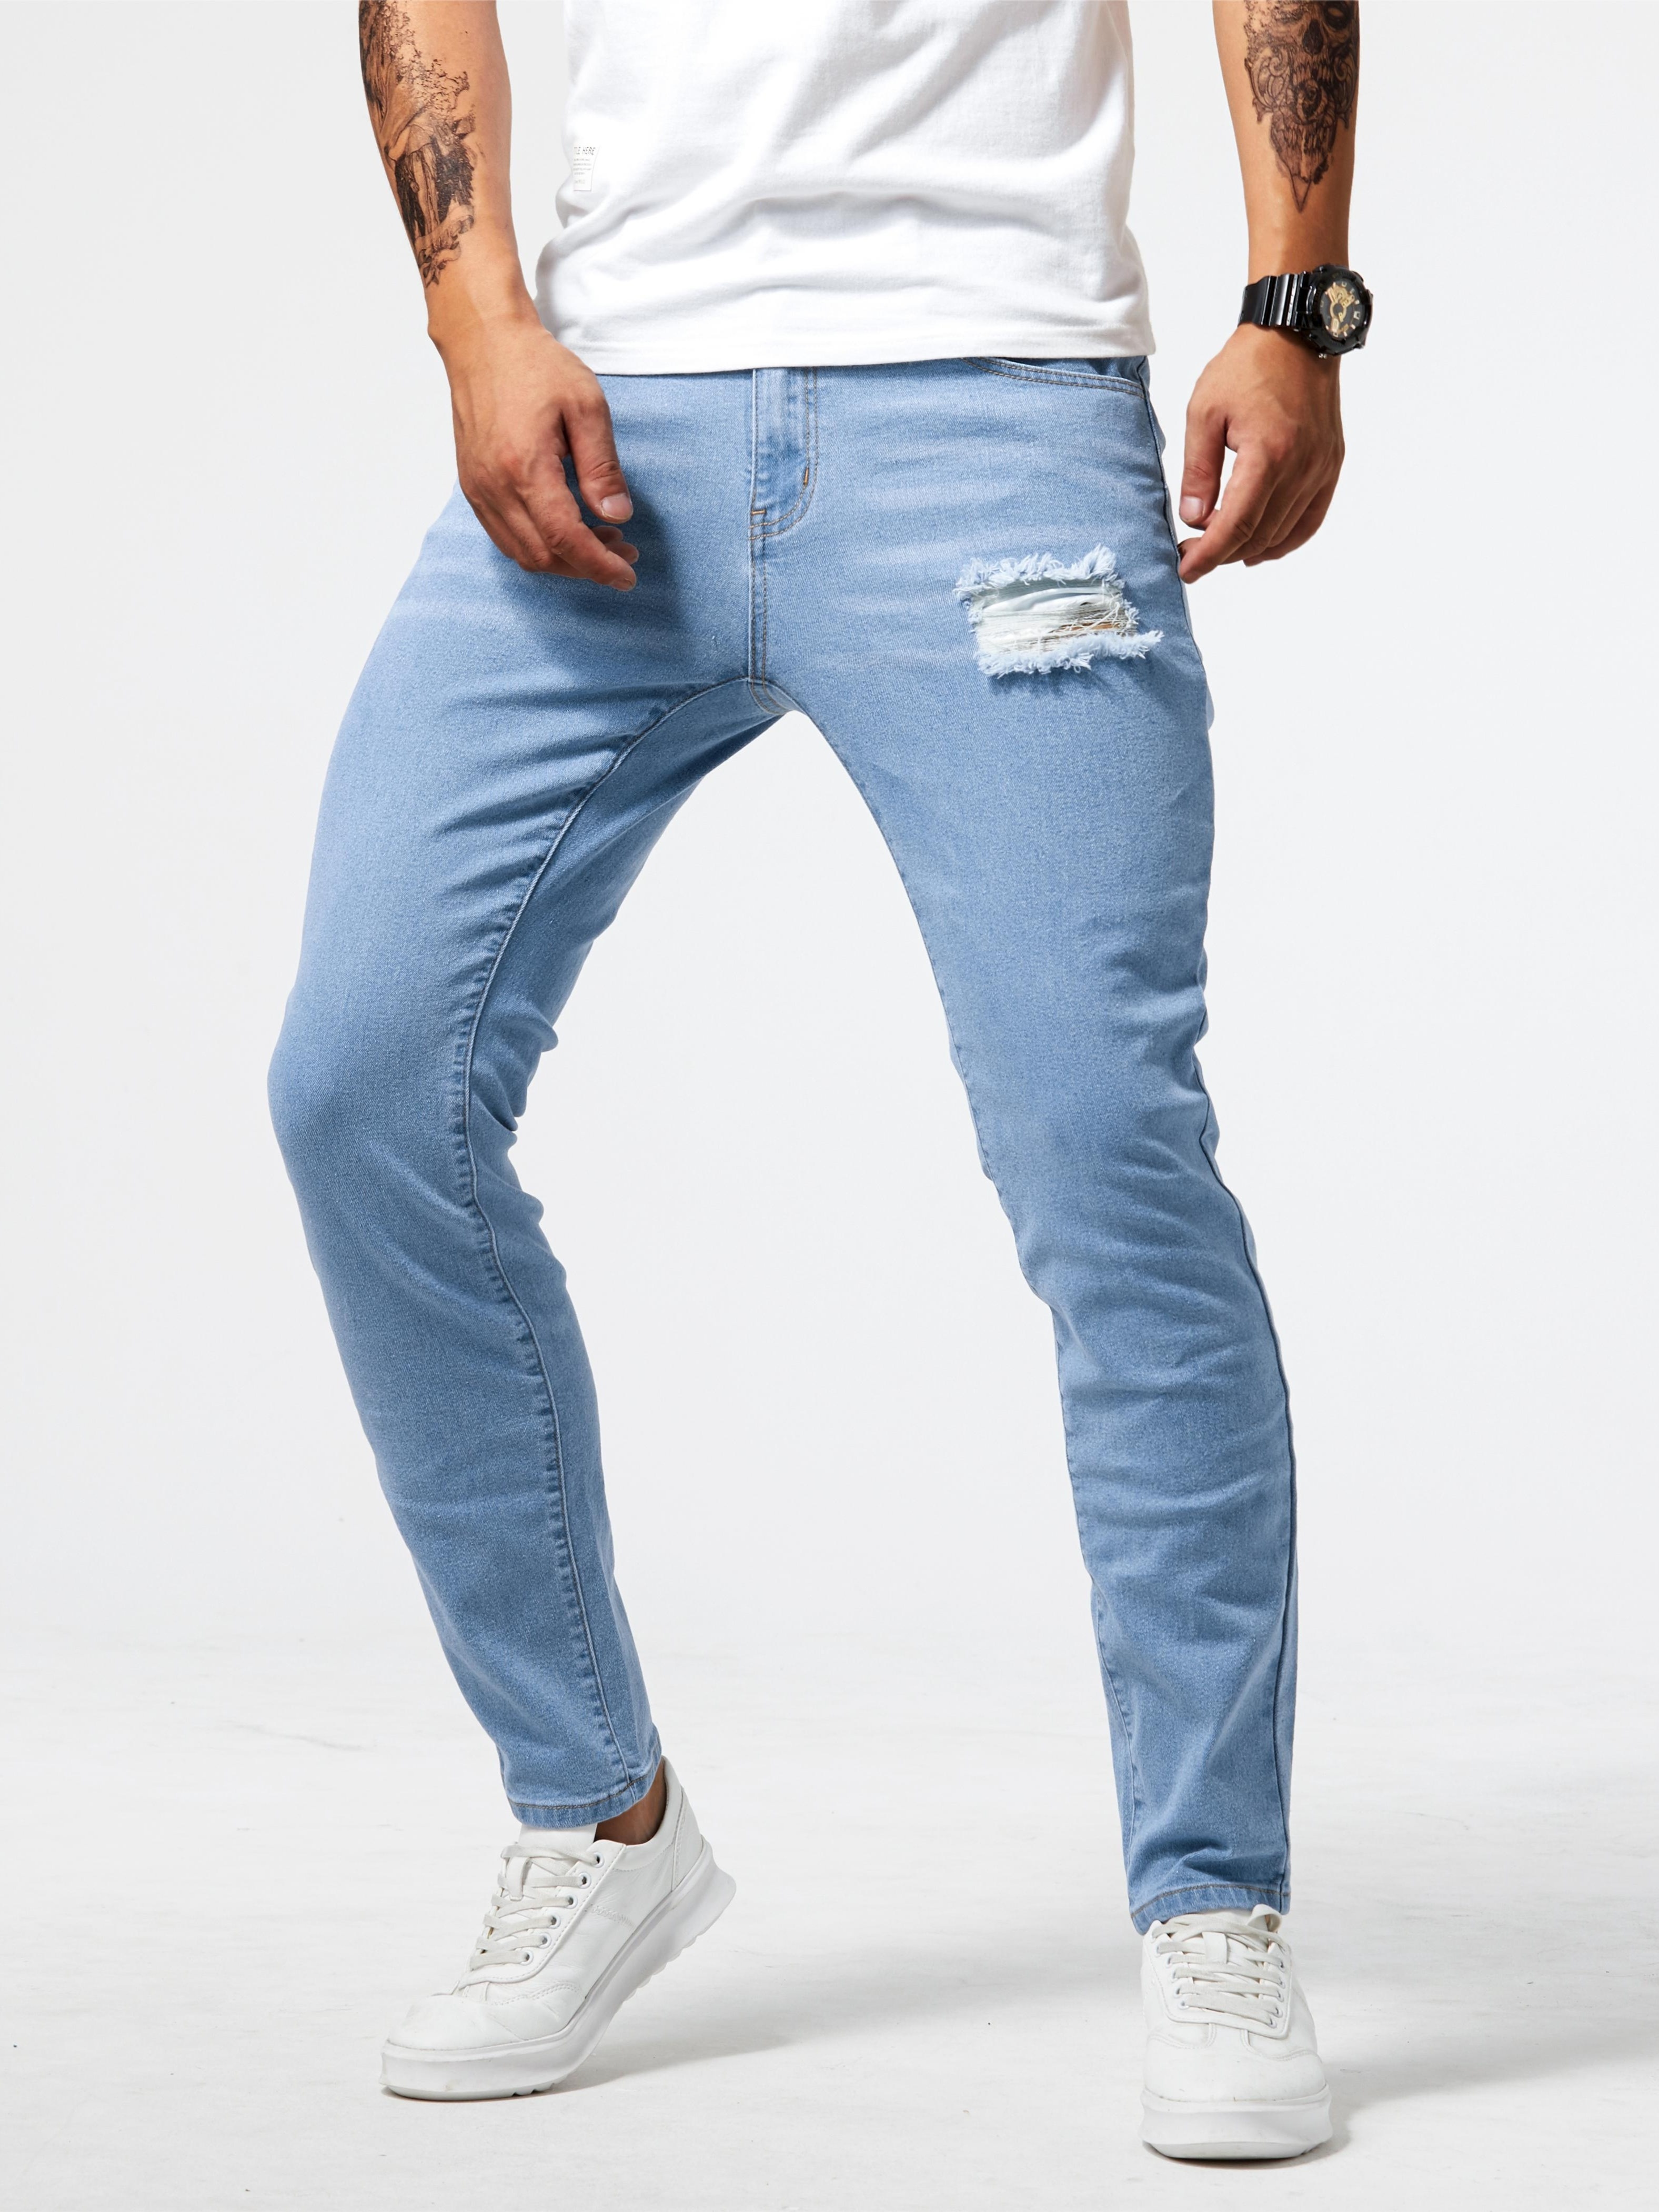 Pontalon Homme Jean Homme New Blue Ripped Tejanos Hombre Slim Pantalon  Hombre Straight Pantalones Vaqueros Casual Jeans for Man2595